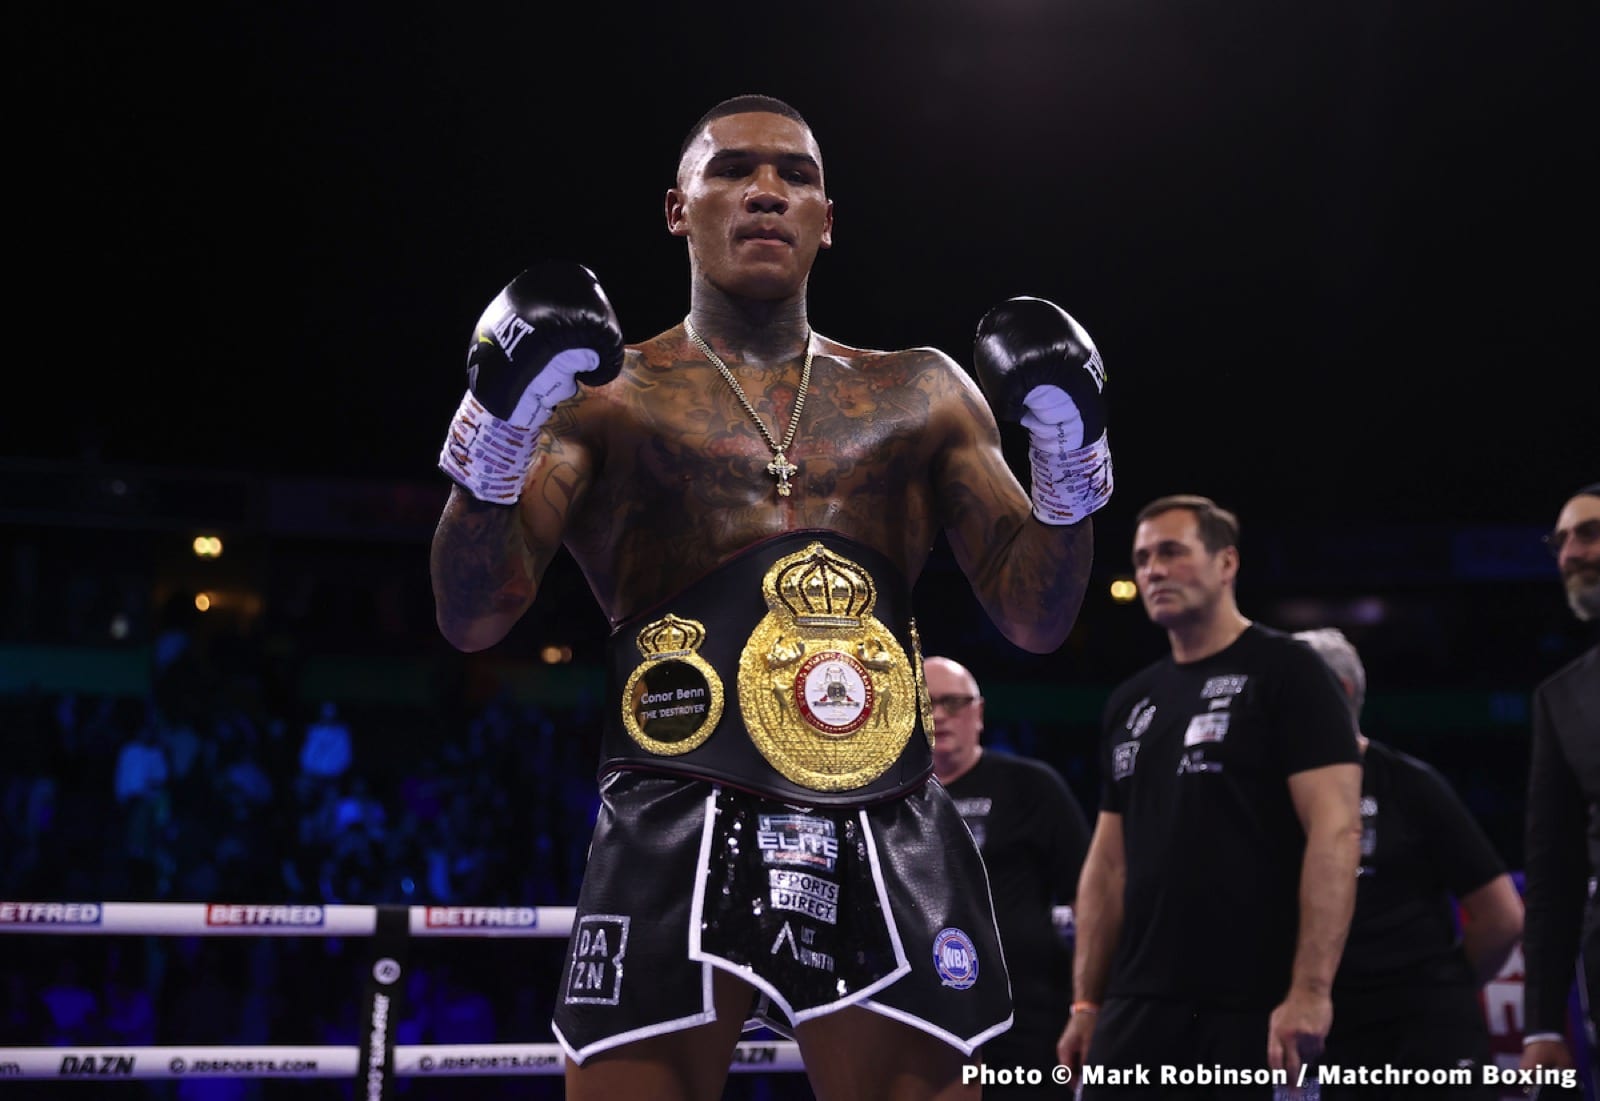 Image: Conor Benn will decide to have B-sample tested or not says Dan Rafael